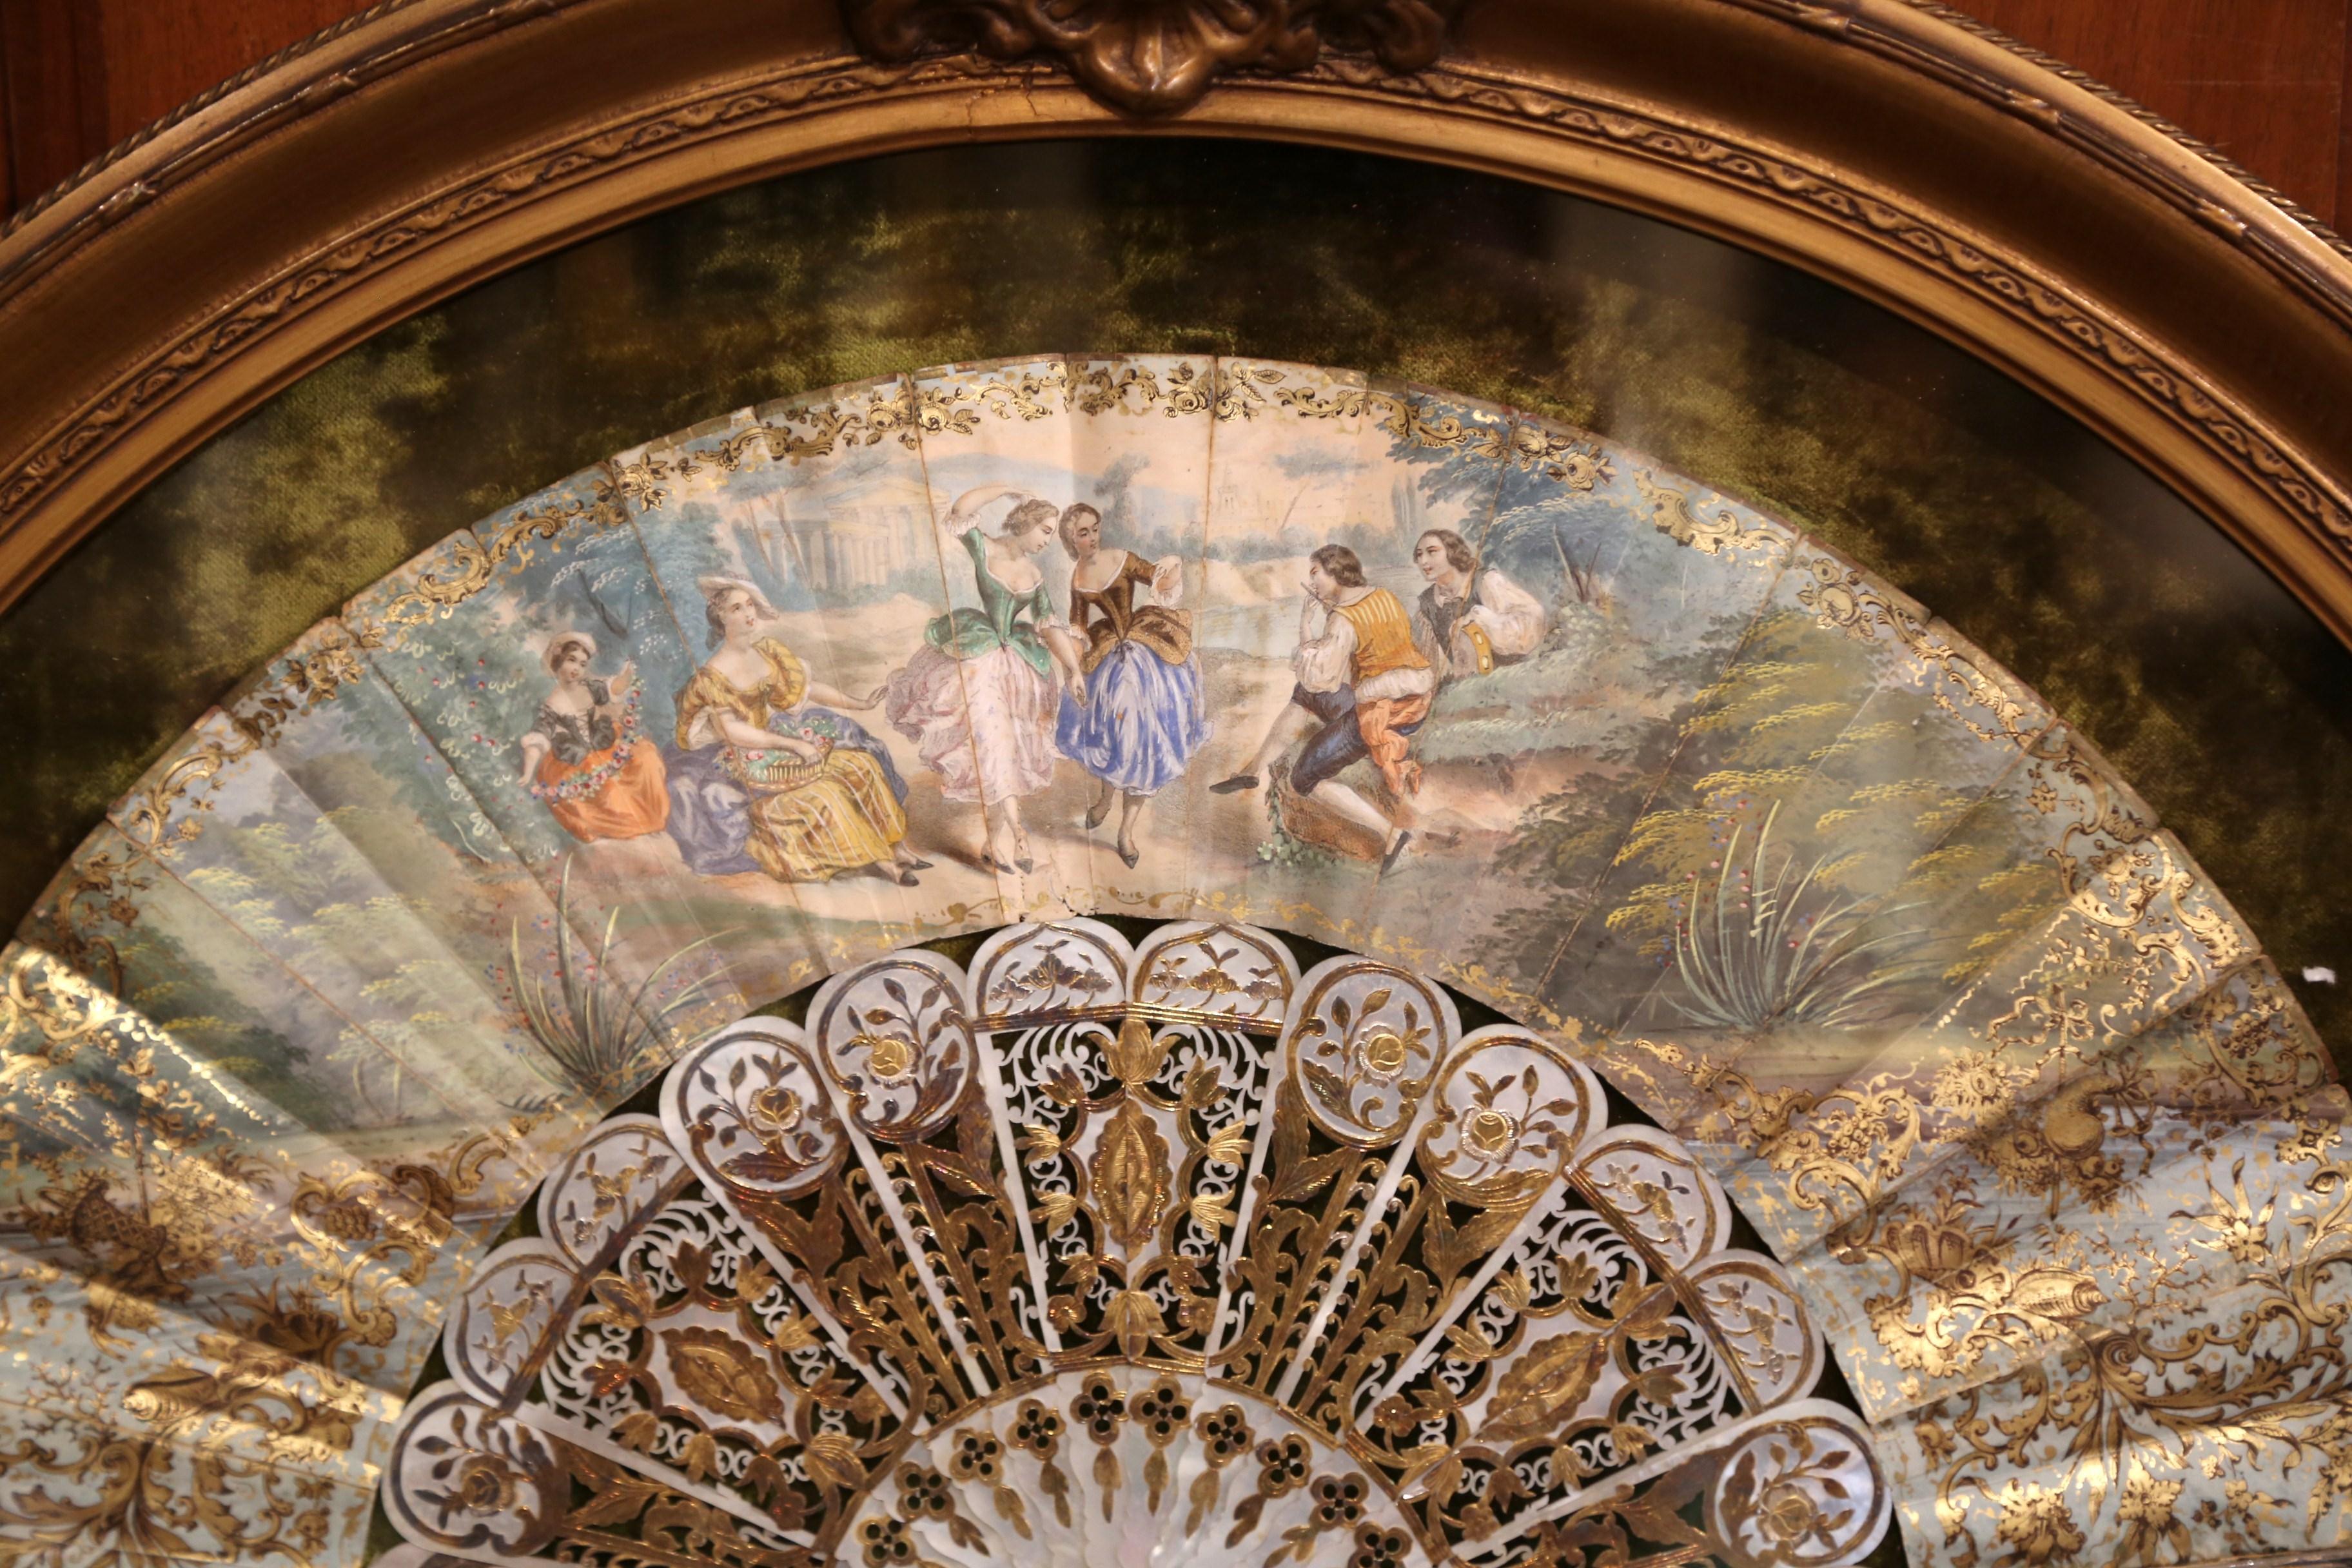 This ornate, antique paper and mother of pearl hand fan was crafted in France, circa 1780. The Rococo style fan is hand painted with bucolic courting scenes, and is embellished with luxurious gilt accents. The delicate hand fan is encased in glass